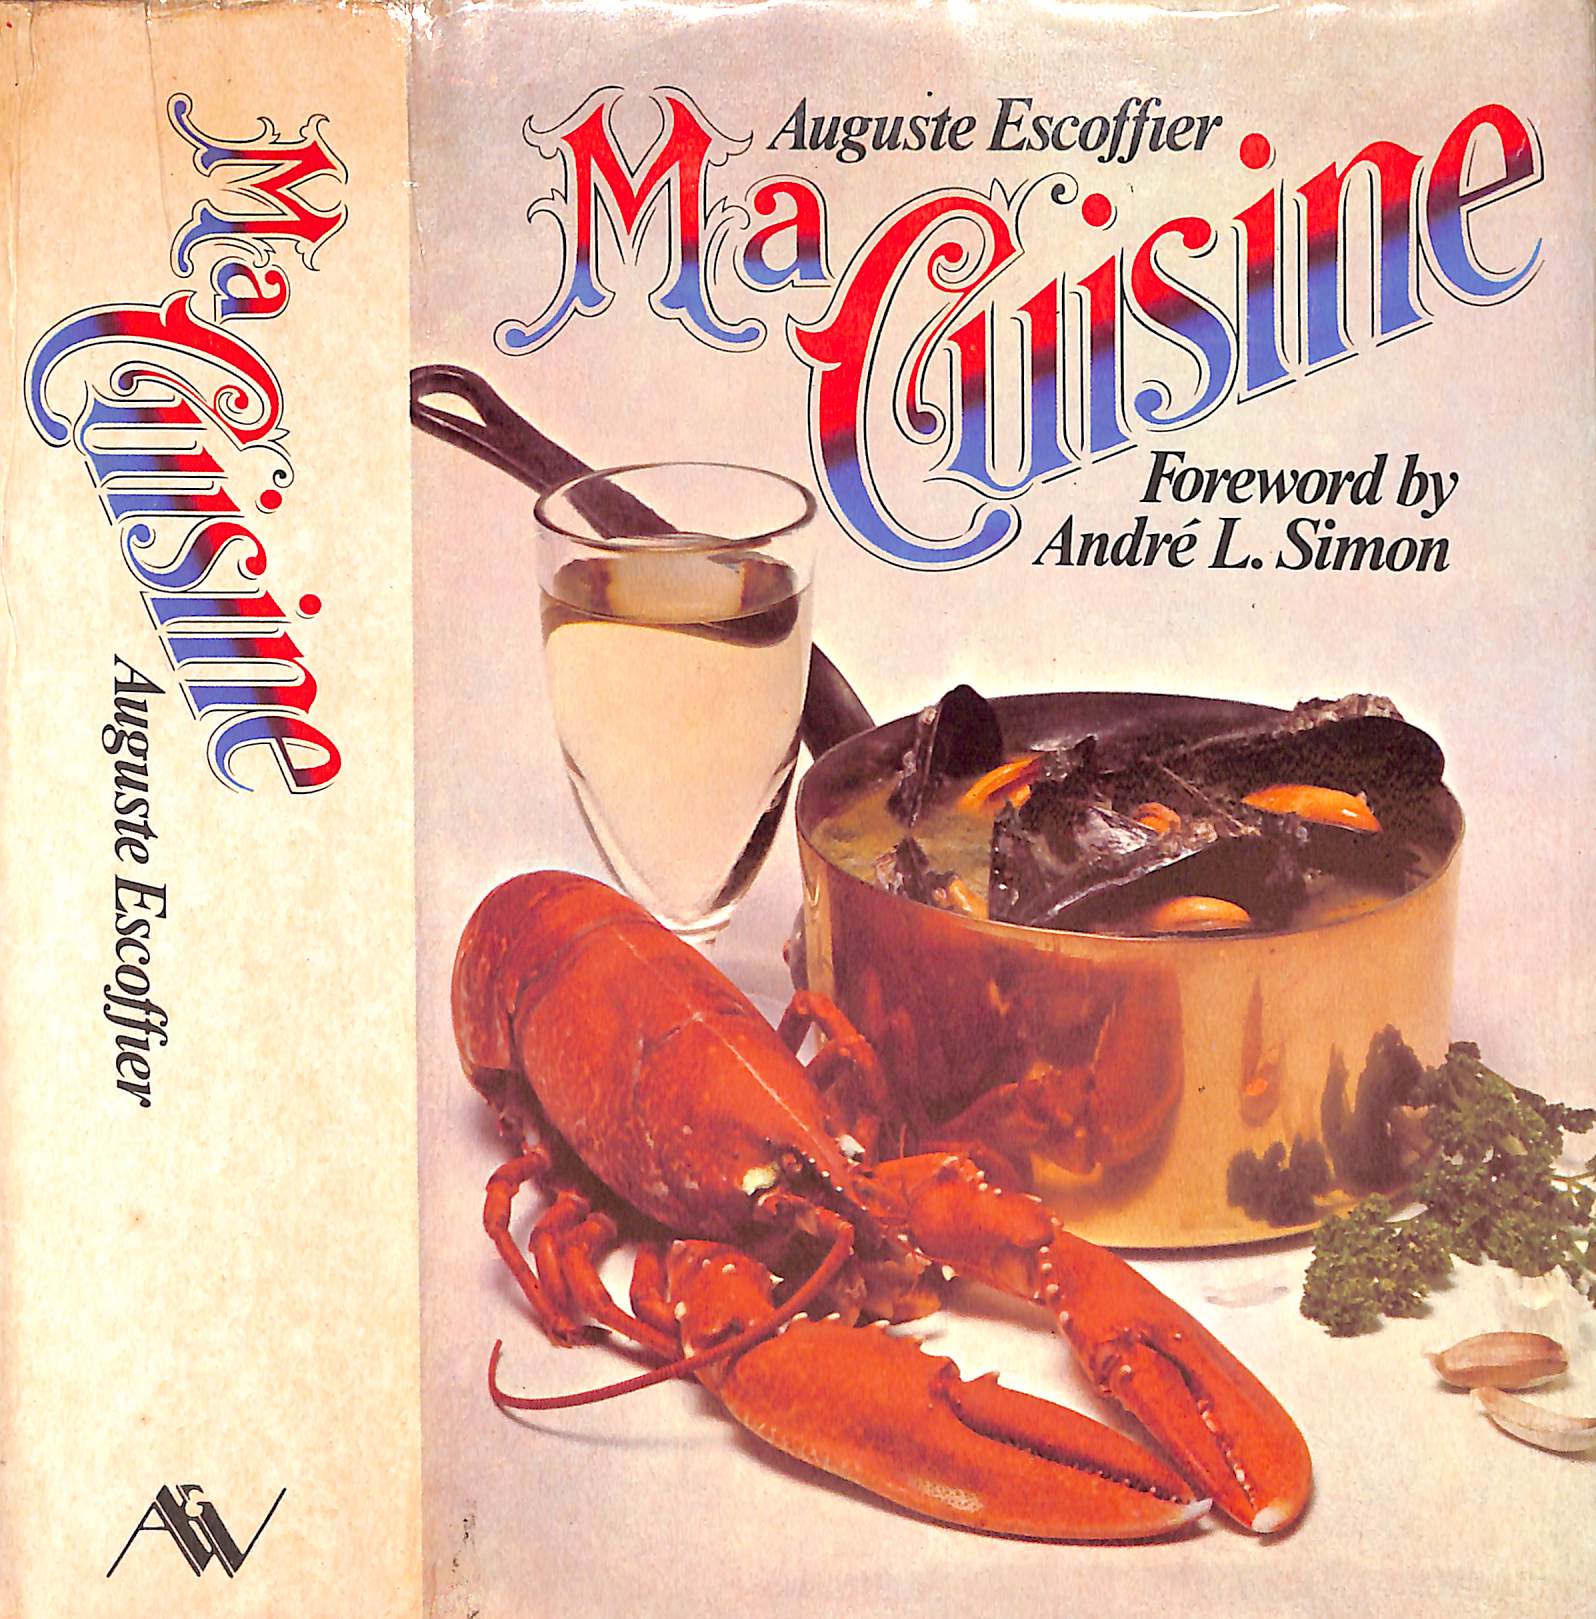 Why Escoffier?  The Art of Eating Magazine